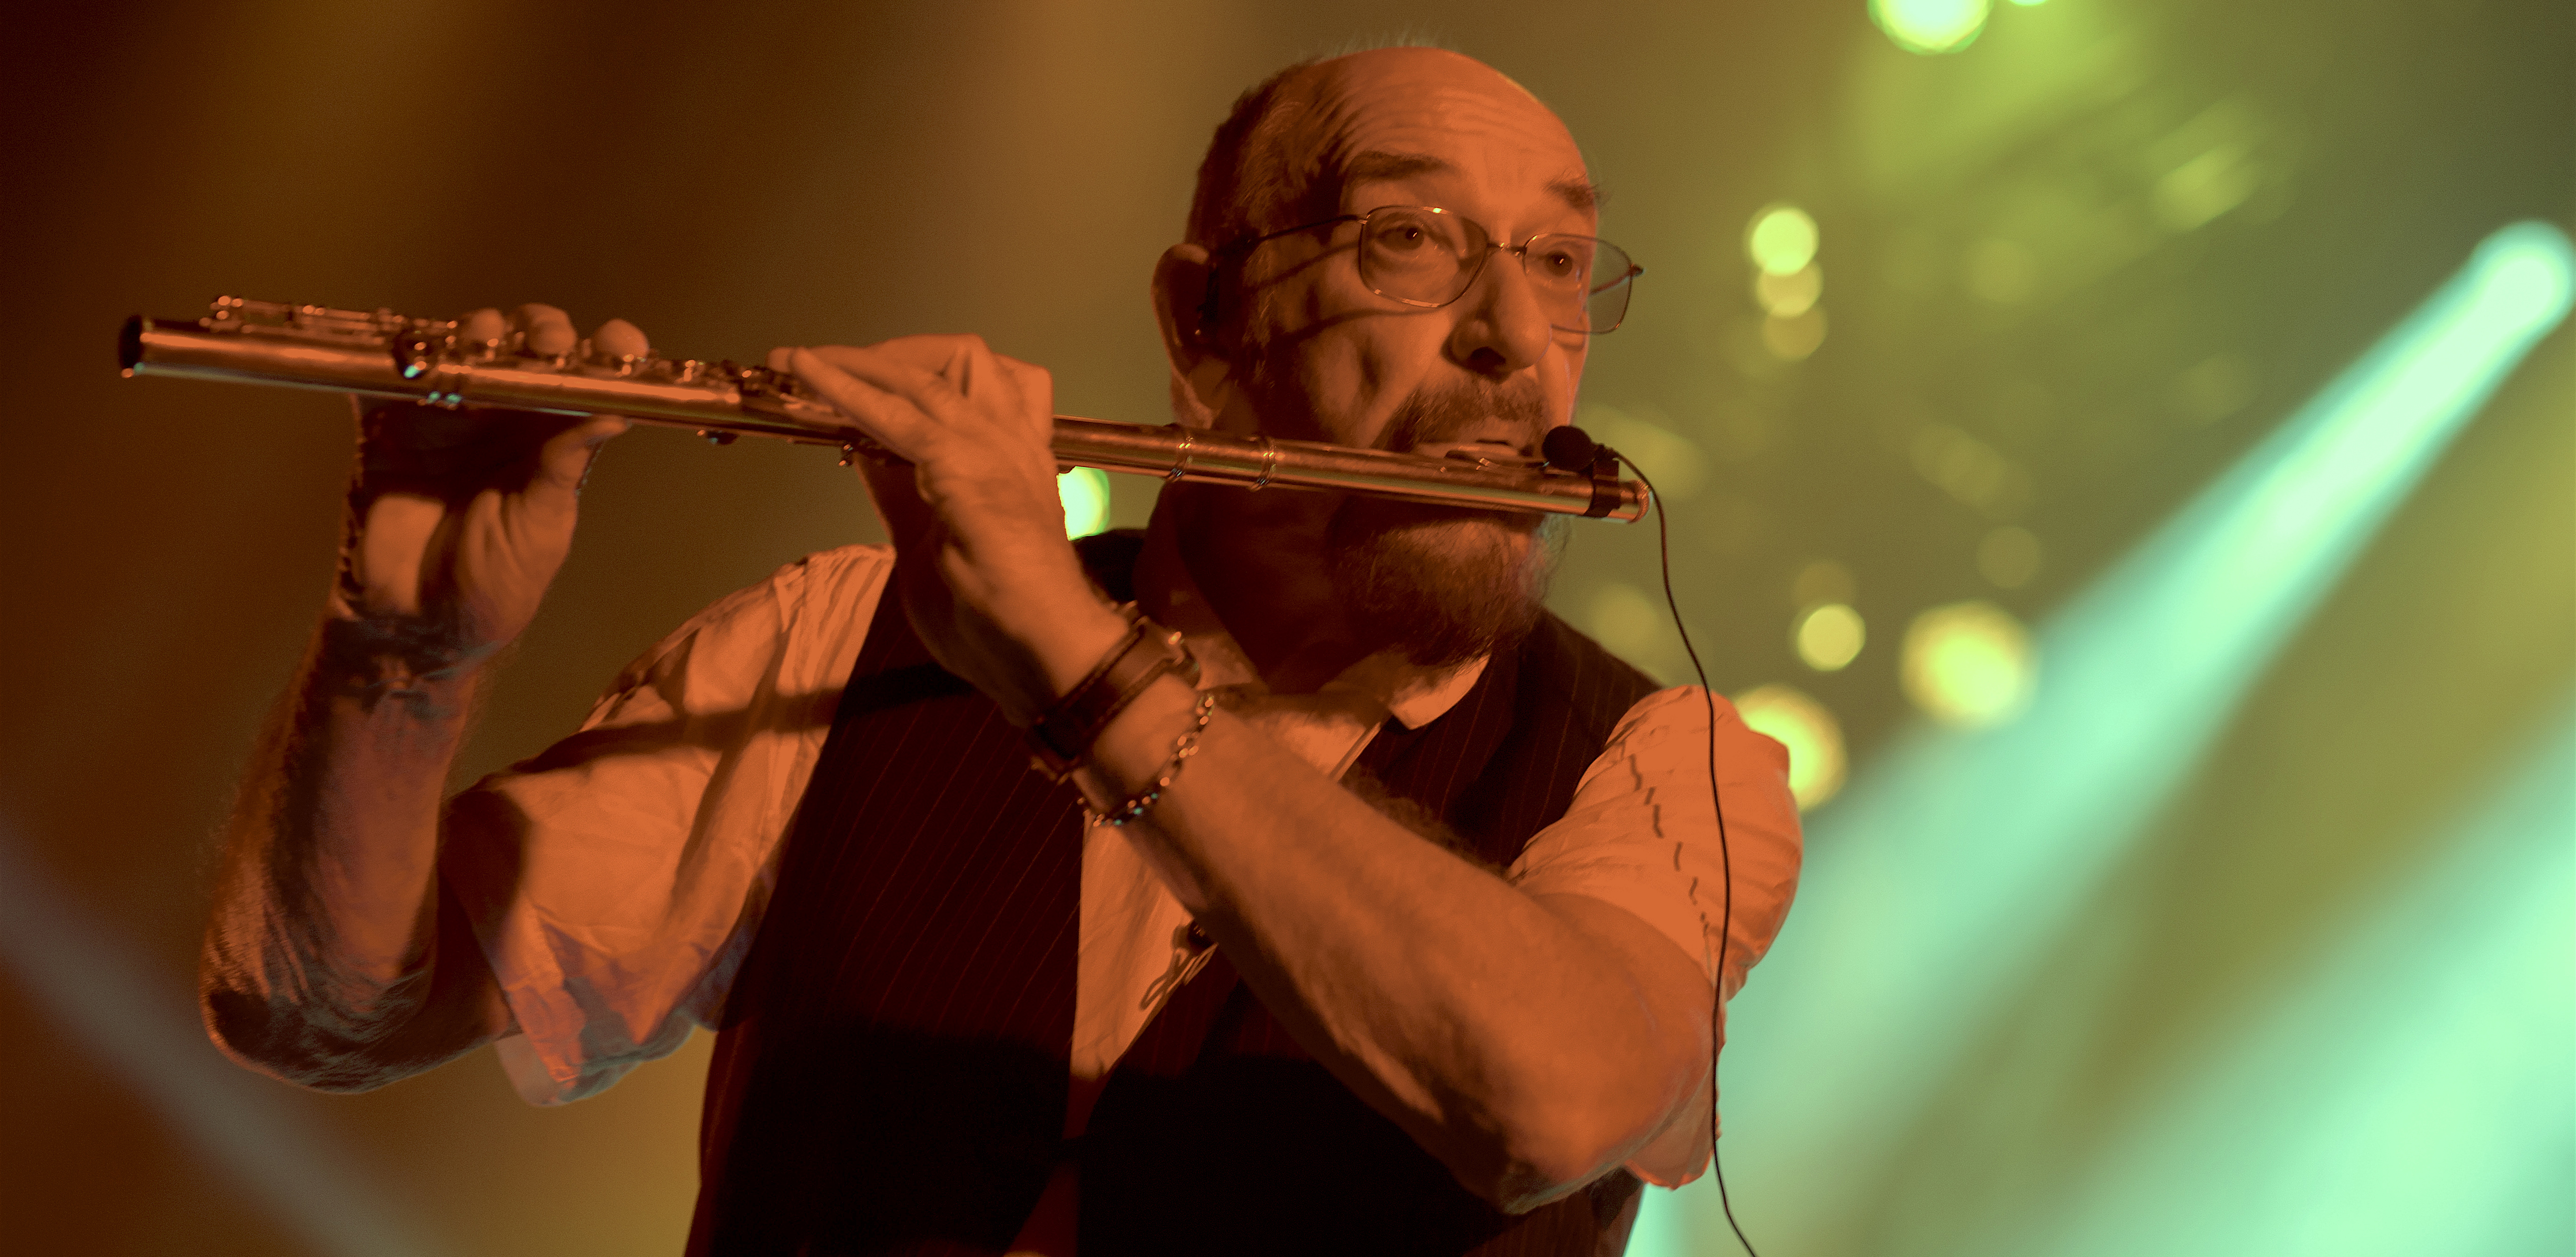 Jethro Tull won't be done any time soon, says Ian Anderson